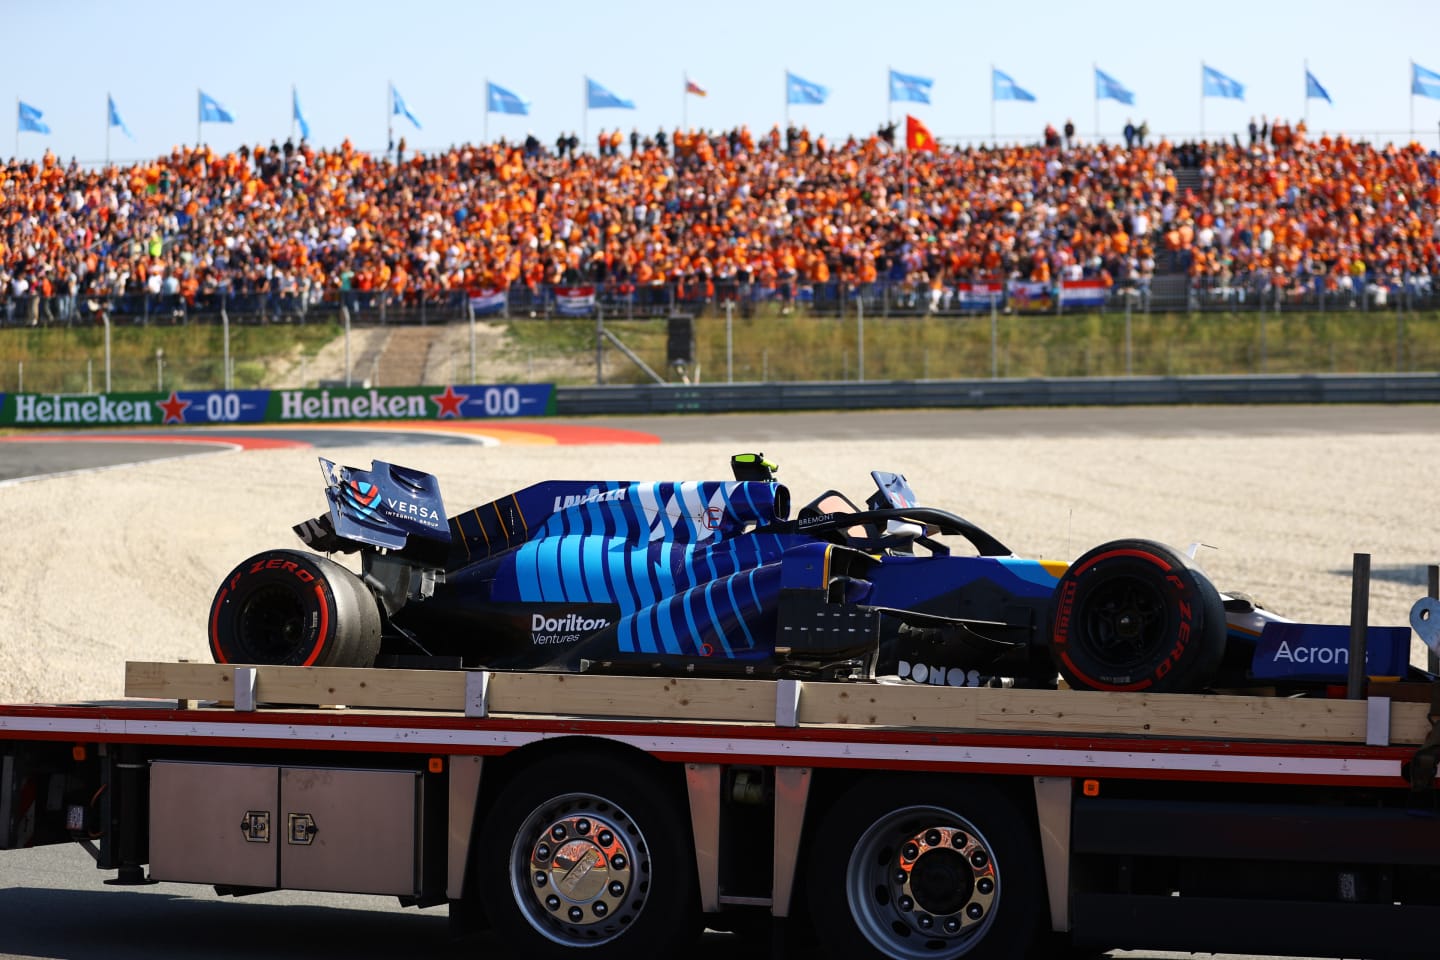 ZANDVOORT, NETHERLANDS - SEPTEMBER 04: The broken car of Nicholas Latifi of Canada and Williams is returned to the pits during qualifying ahead of the F1 Grand Prix of The Netherlands at Circuit Zandvoort on September 04, 2021 in Zandvoort, Netherlands. (Photo by Bryn Lennon/Getty Images)